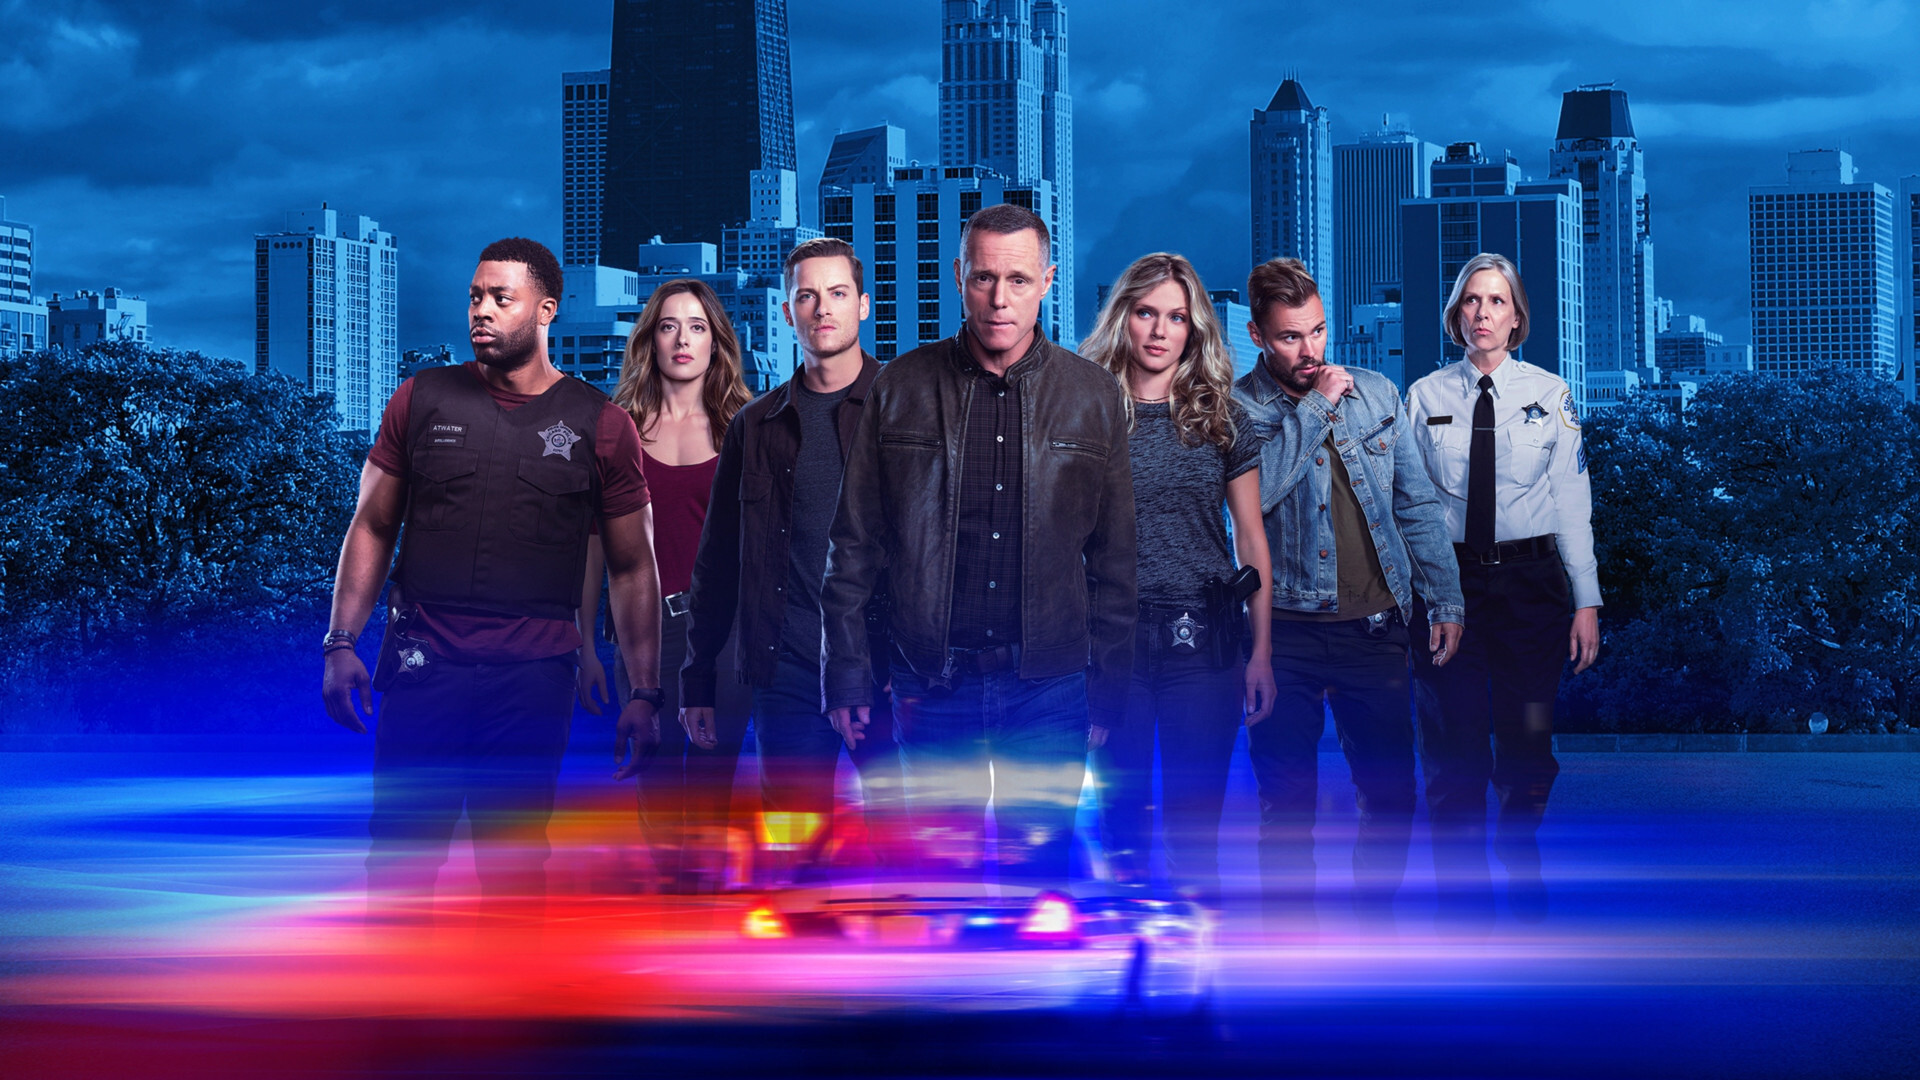 Chicago P.D. (TV Series): Season 9 Episode 3, The One Next to Me, NBC, 2021, Uniformed Cops And Intelligence Unit. 1920x1080 Full HD Wallpaper.